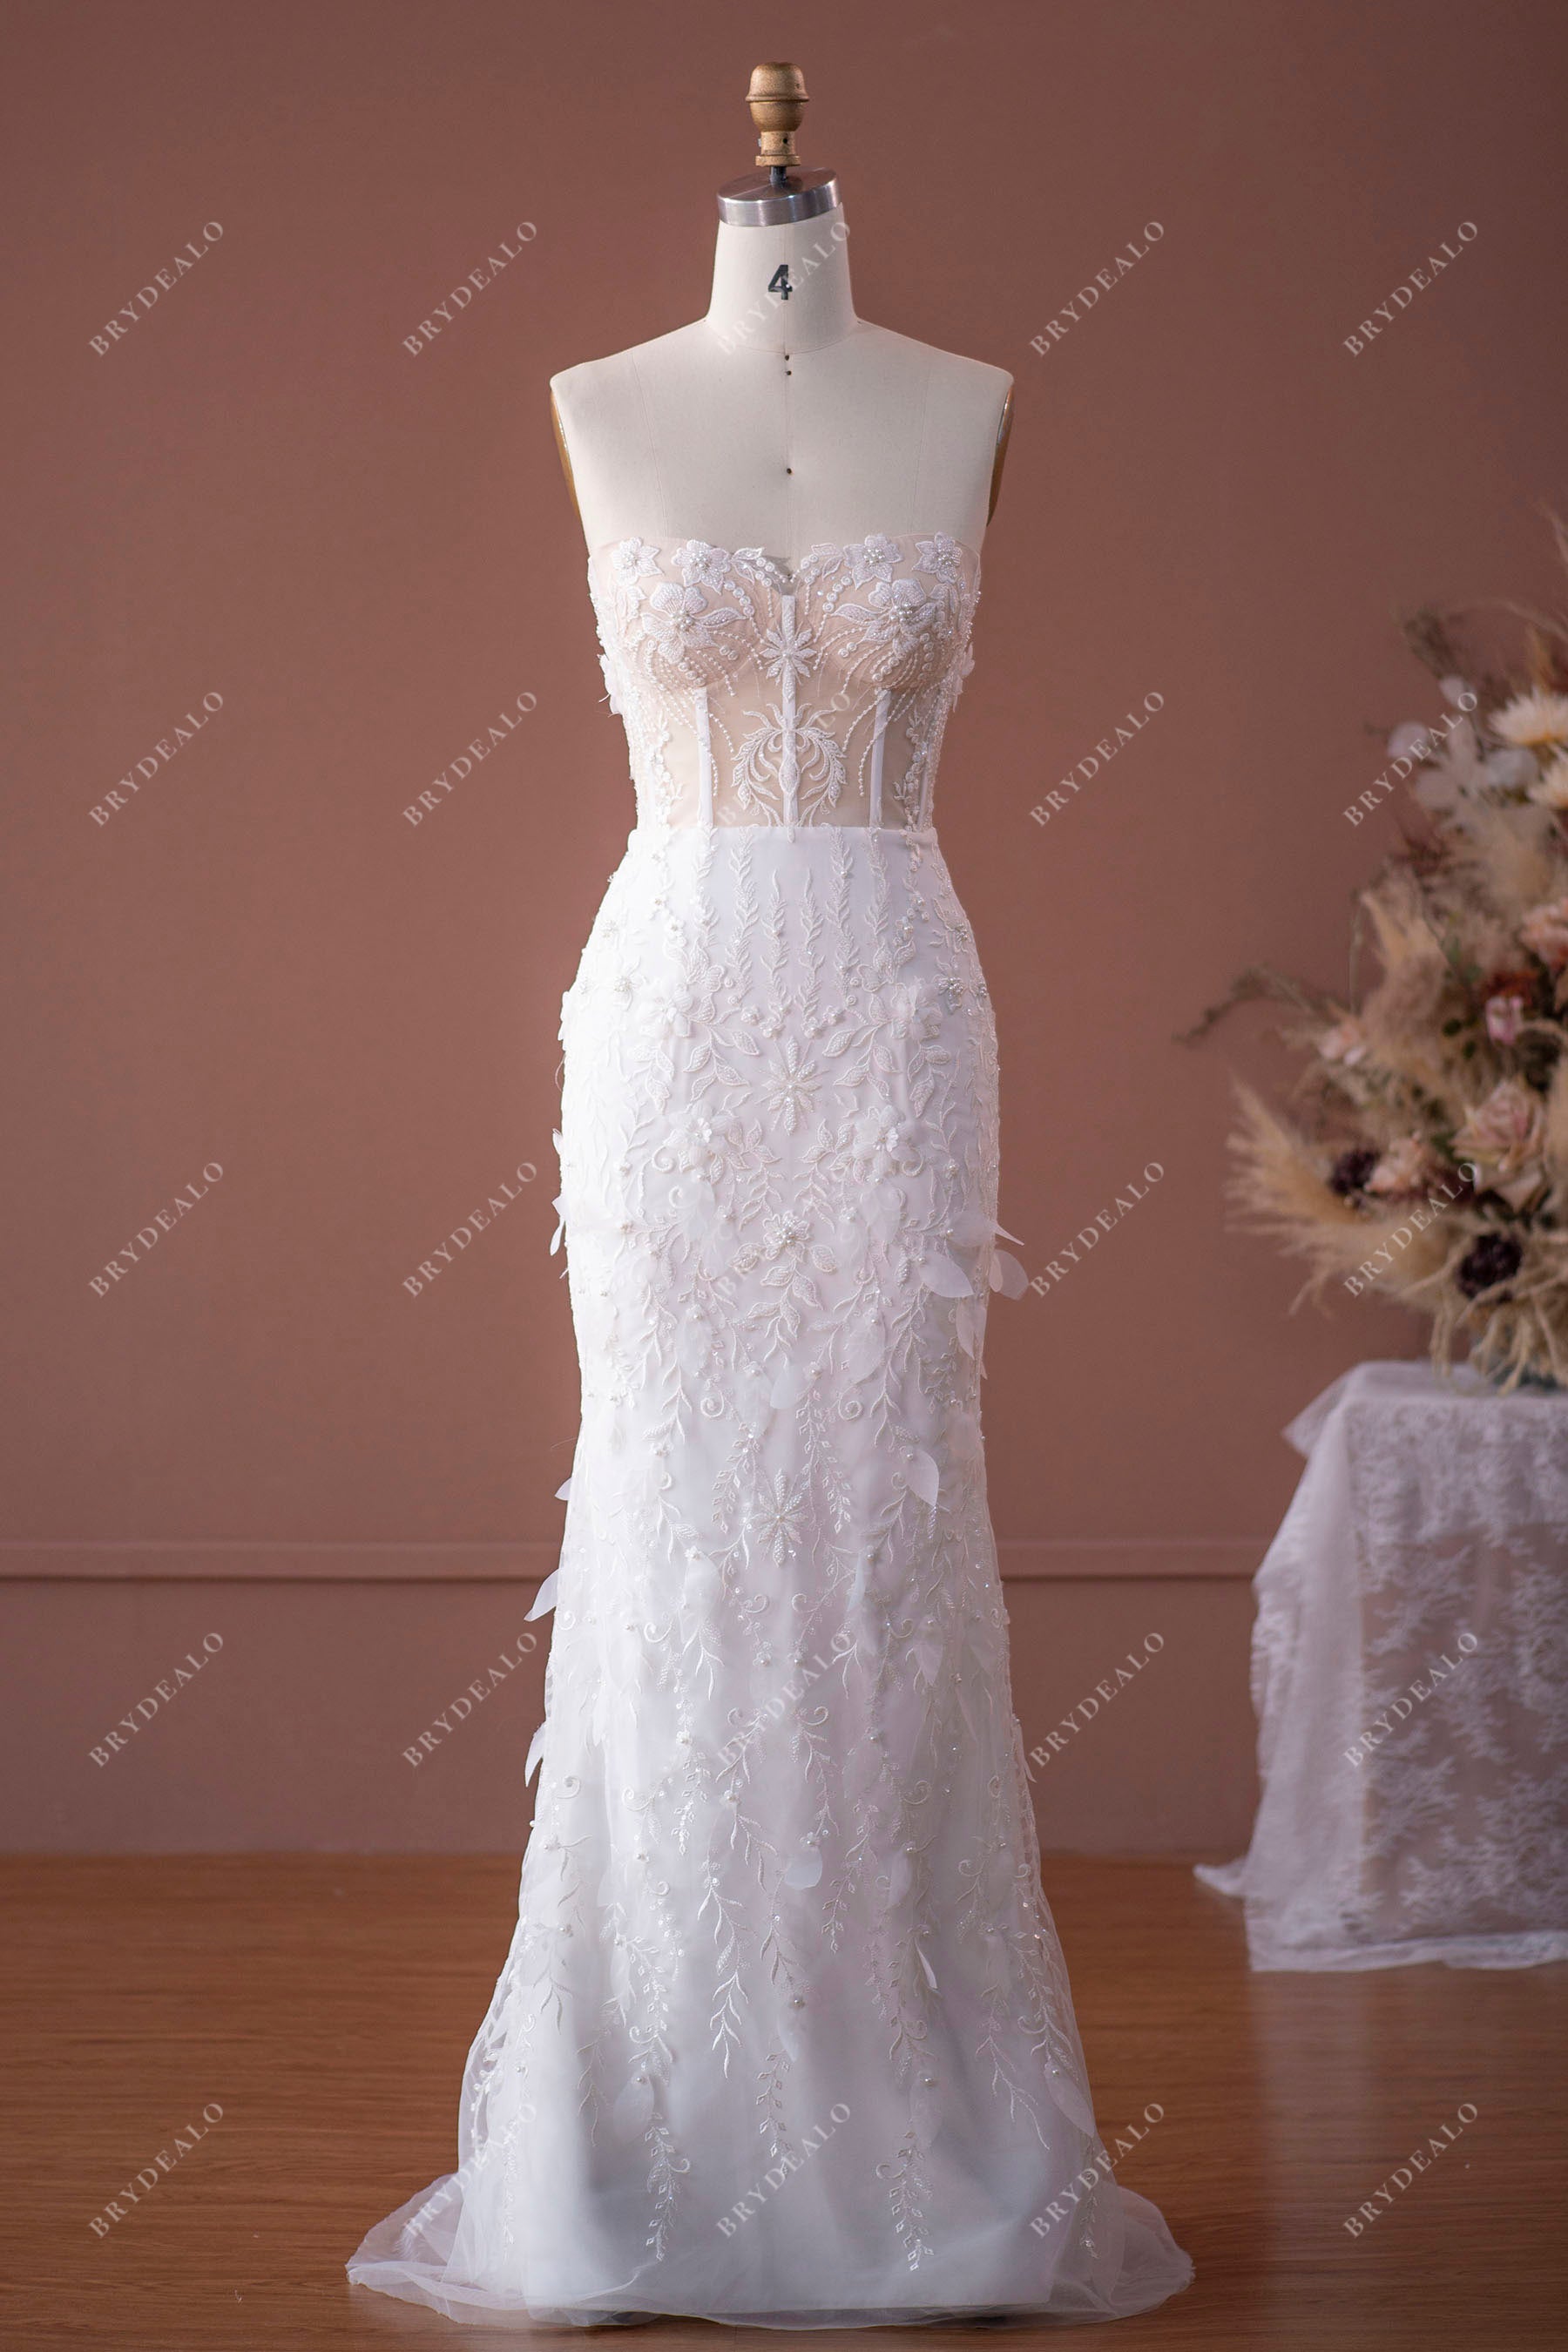 private label Flower Corset Bridal Gown